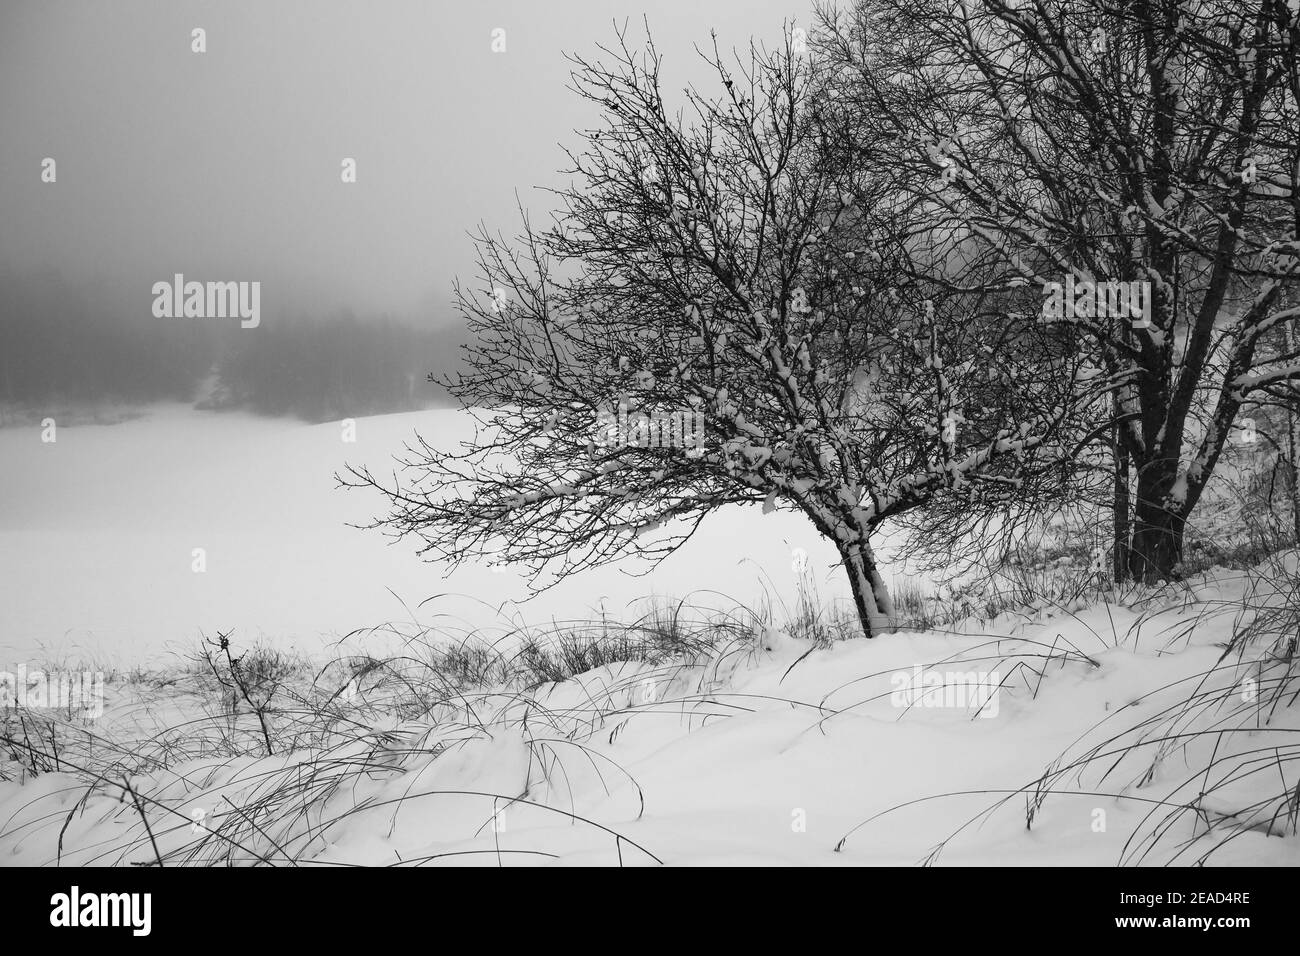 Snow covered apple tree, snowy and misty weather in countryside Stock Photo